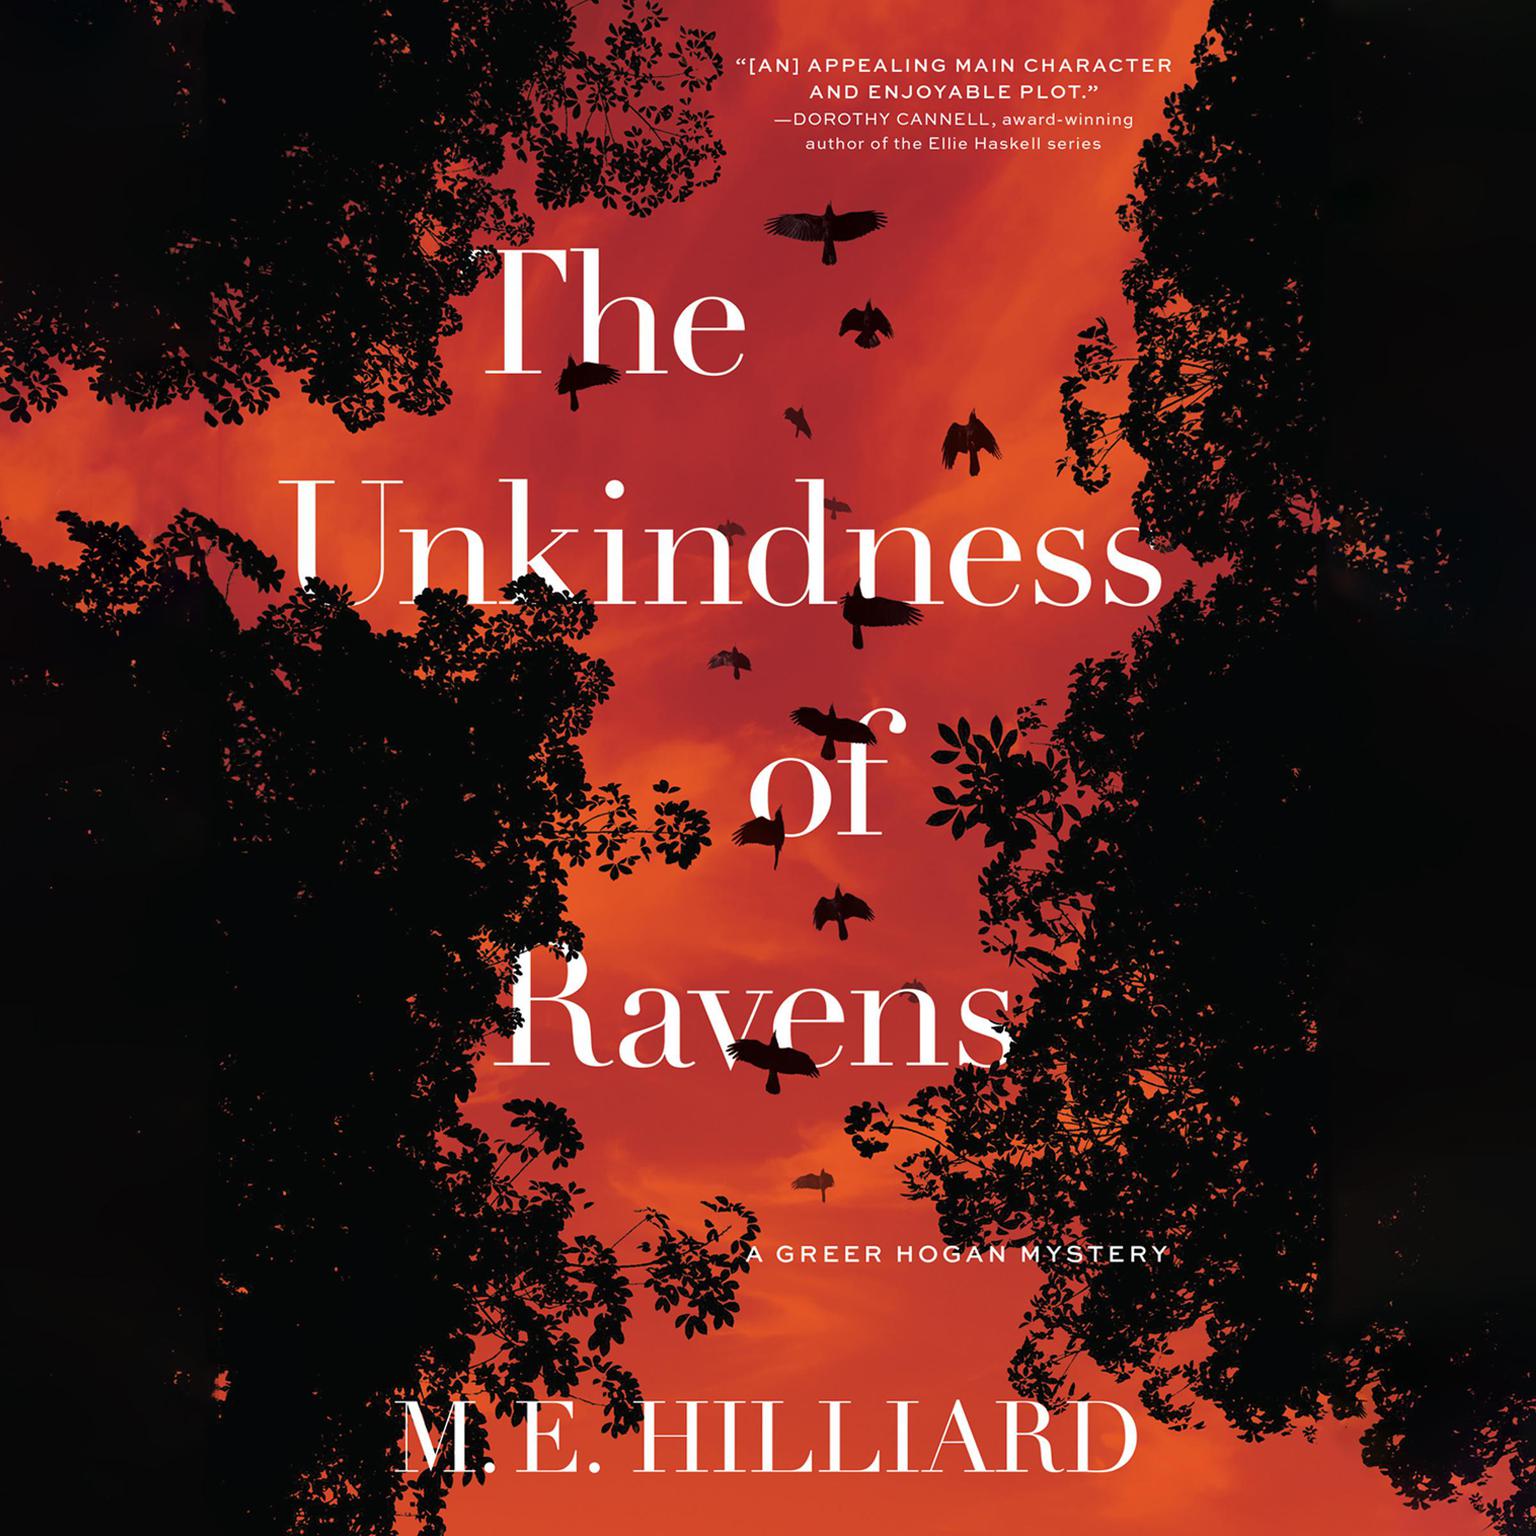 The Unkindness of Ravens Audiobook, by M. E. Hilliard